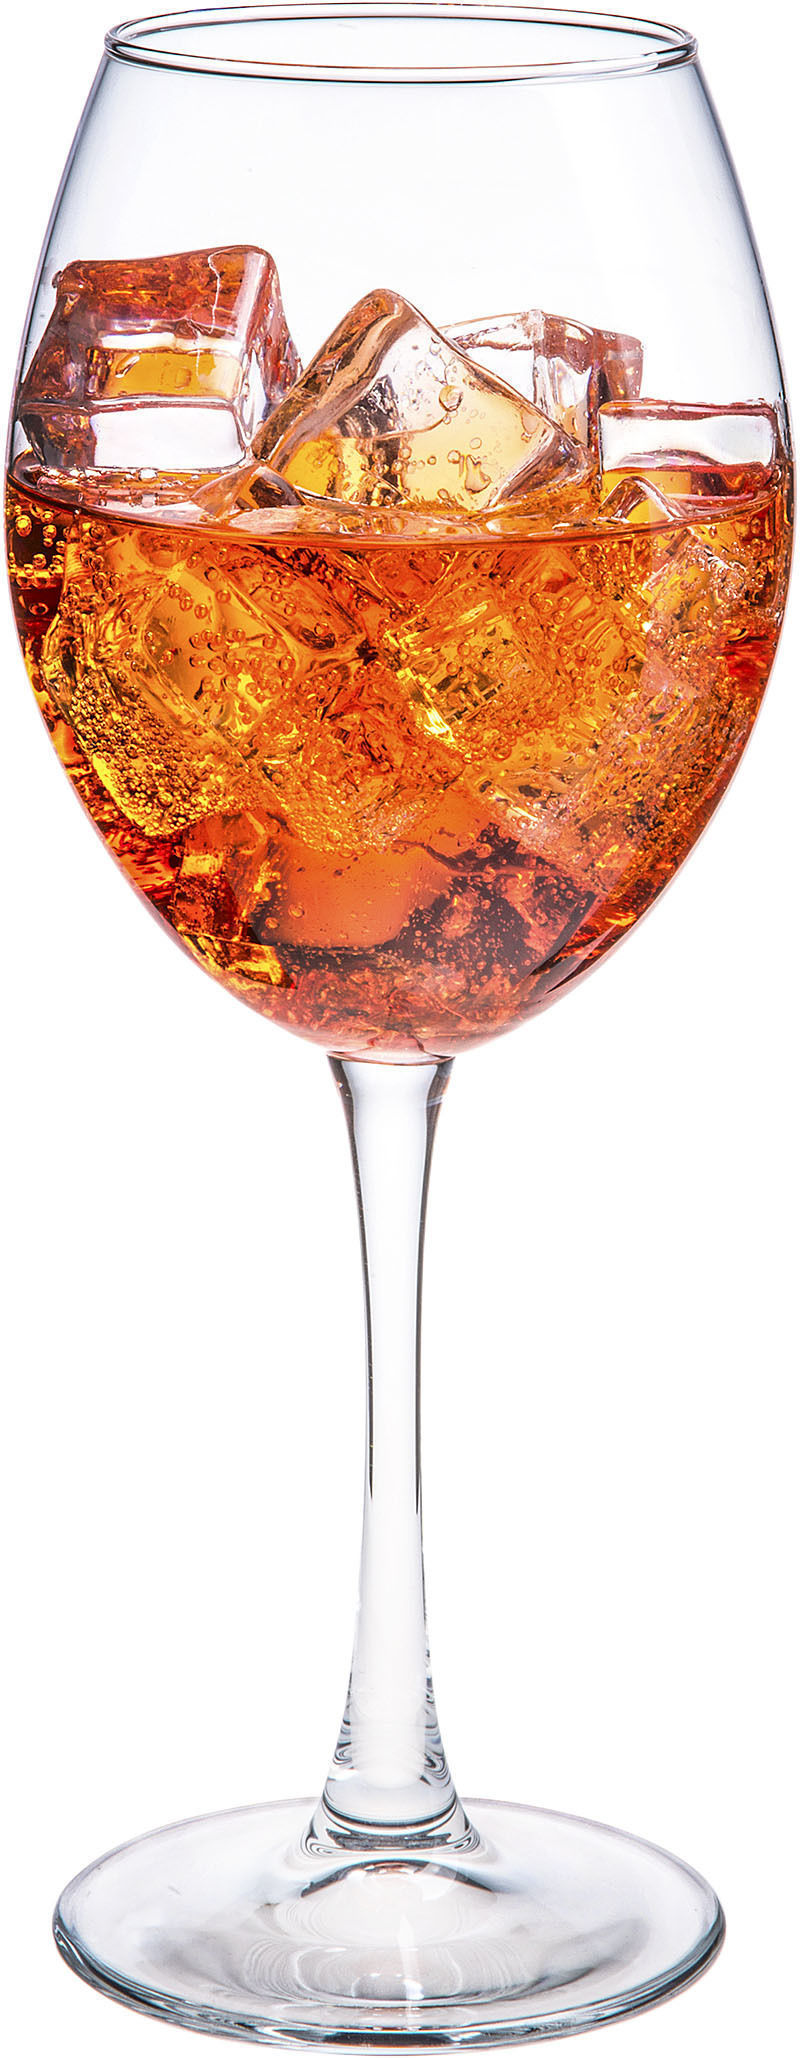 How to Make the Aperol Spritz